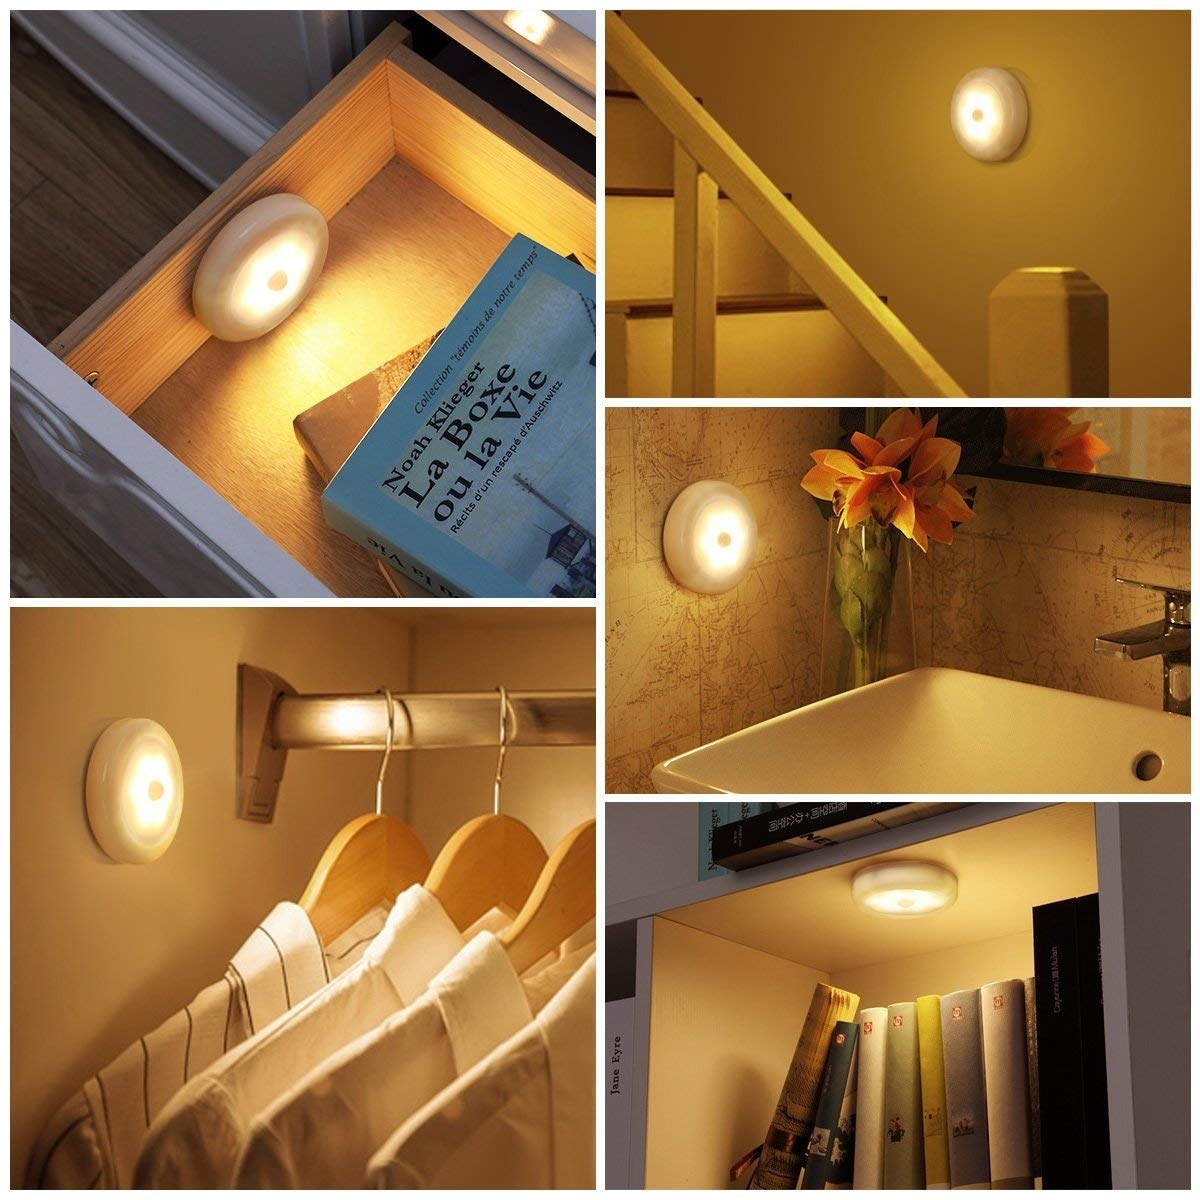 collection of images showing the lights in drawers, under the stairs, bathroom, closet